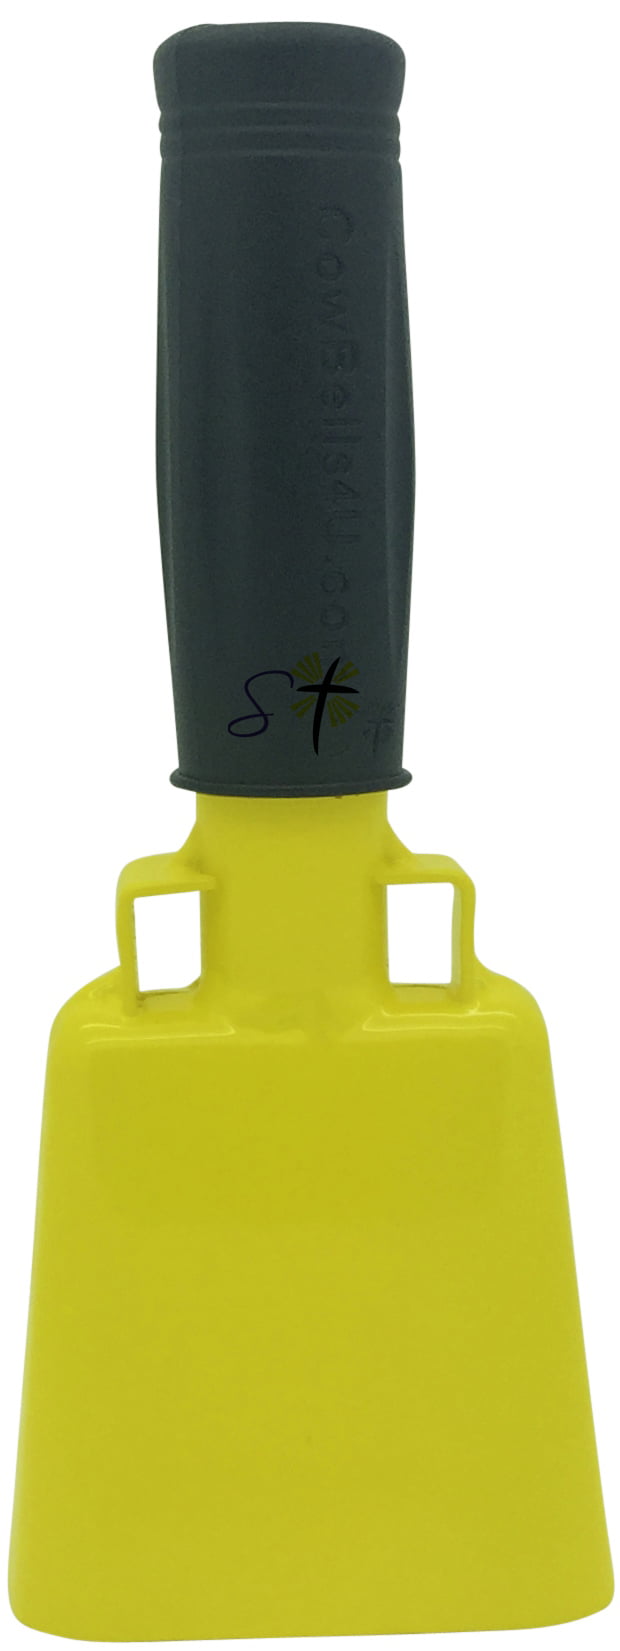 Sport Cowbell - SJNJD5 - IdeaStage Promotional Products